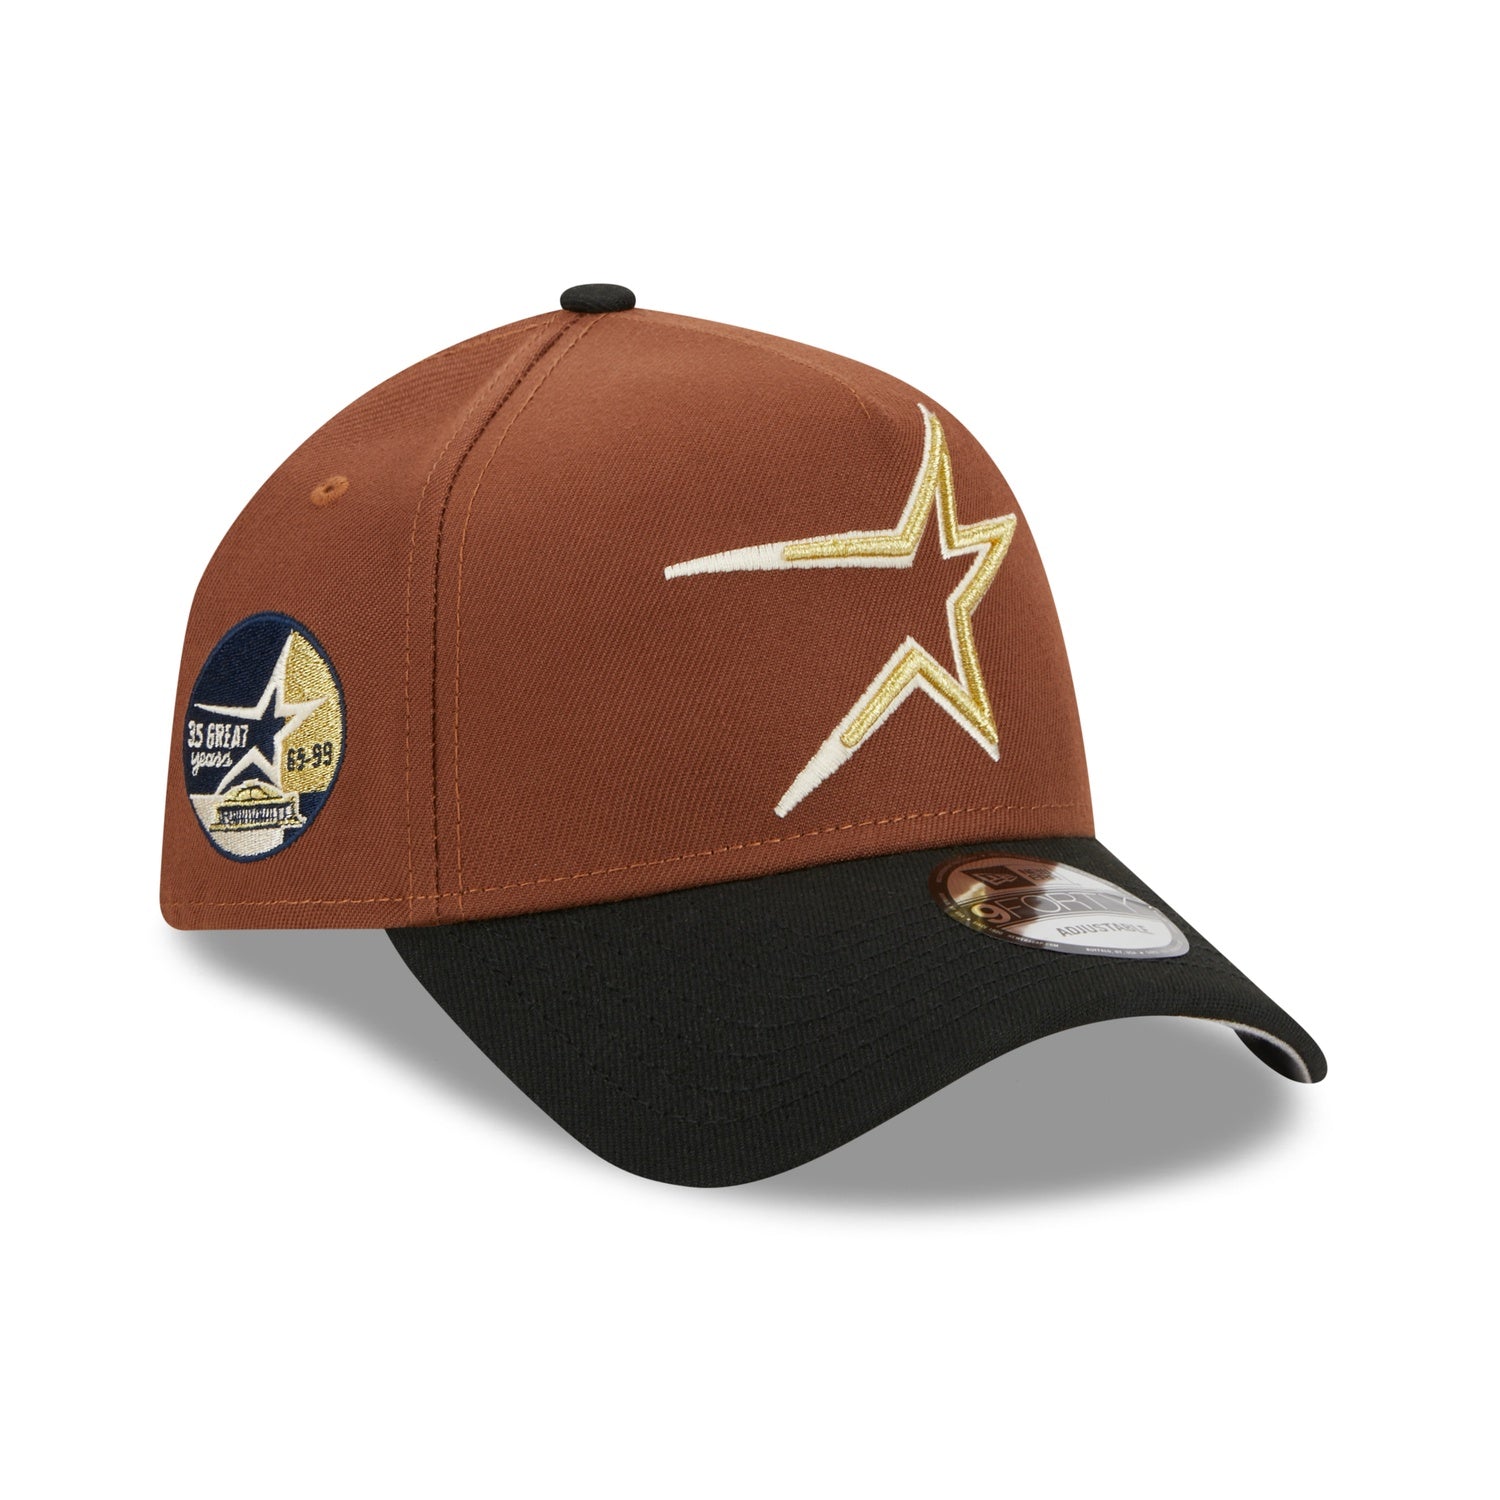 59FIFTY Houston Astros Brown/Black/Gray 35th Anniversary Patch